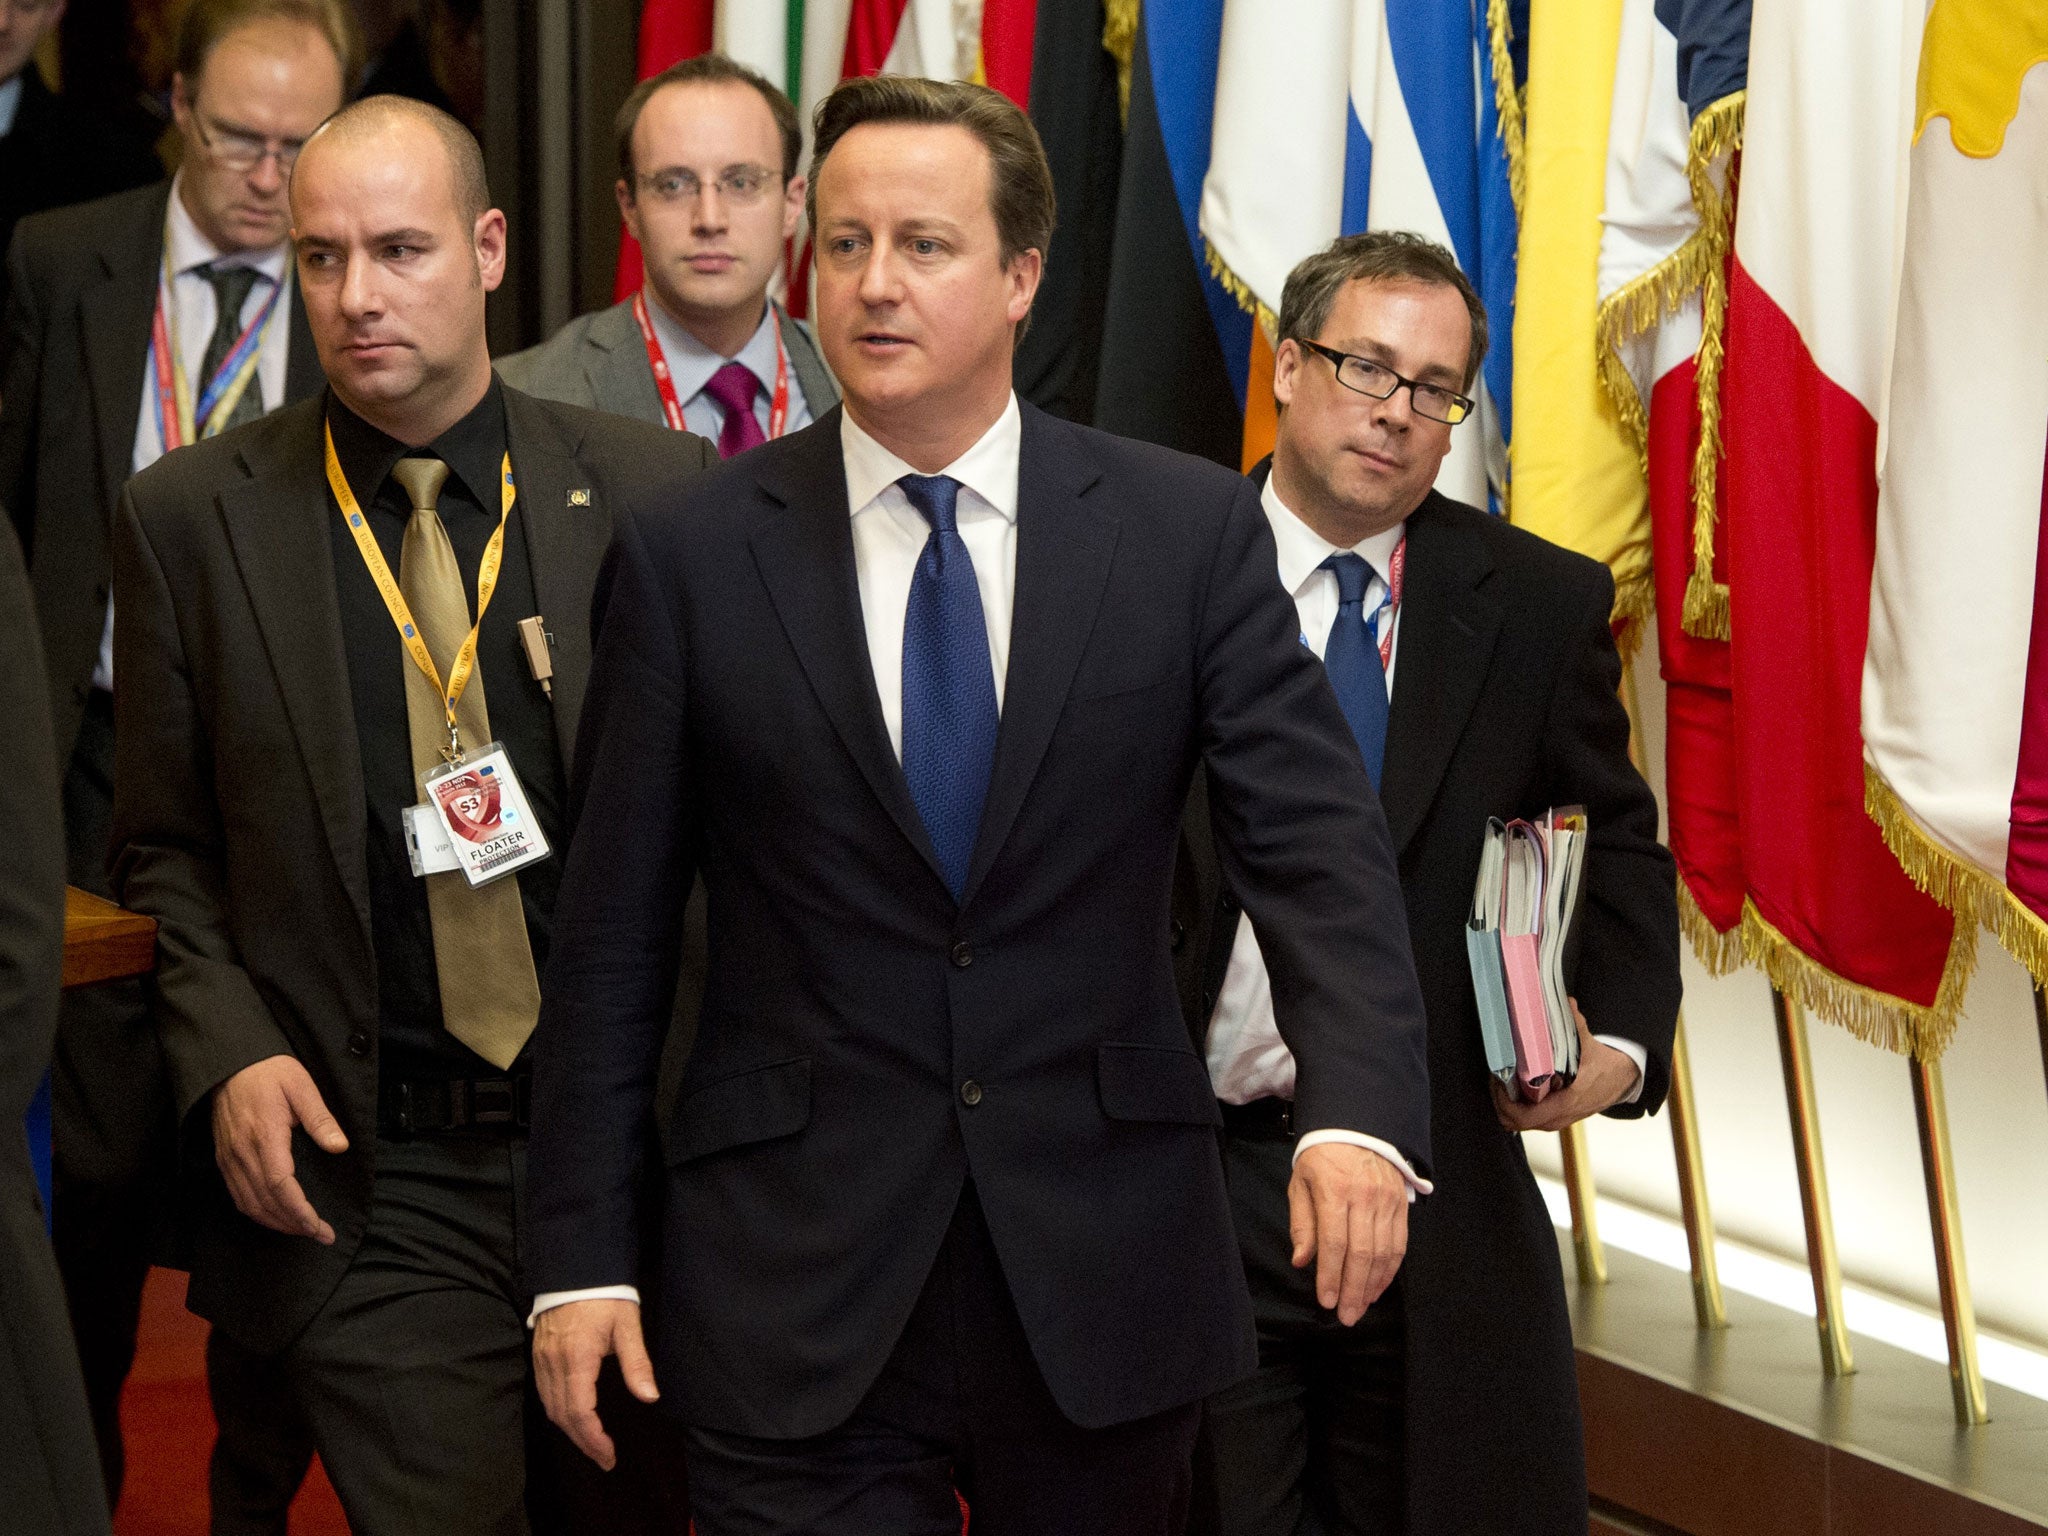 David Cameron, centre, departs after the EU summit in Brussels